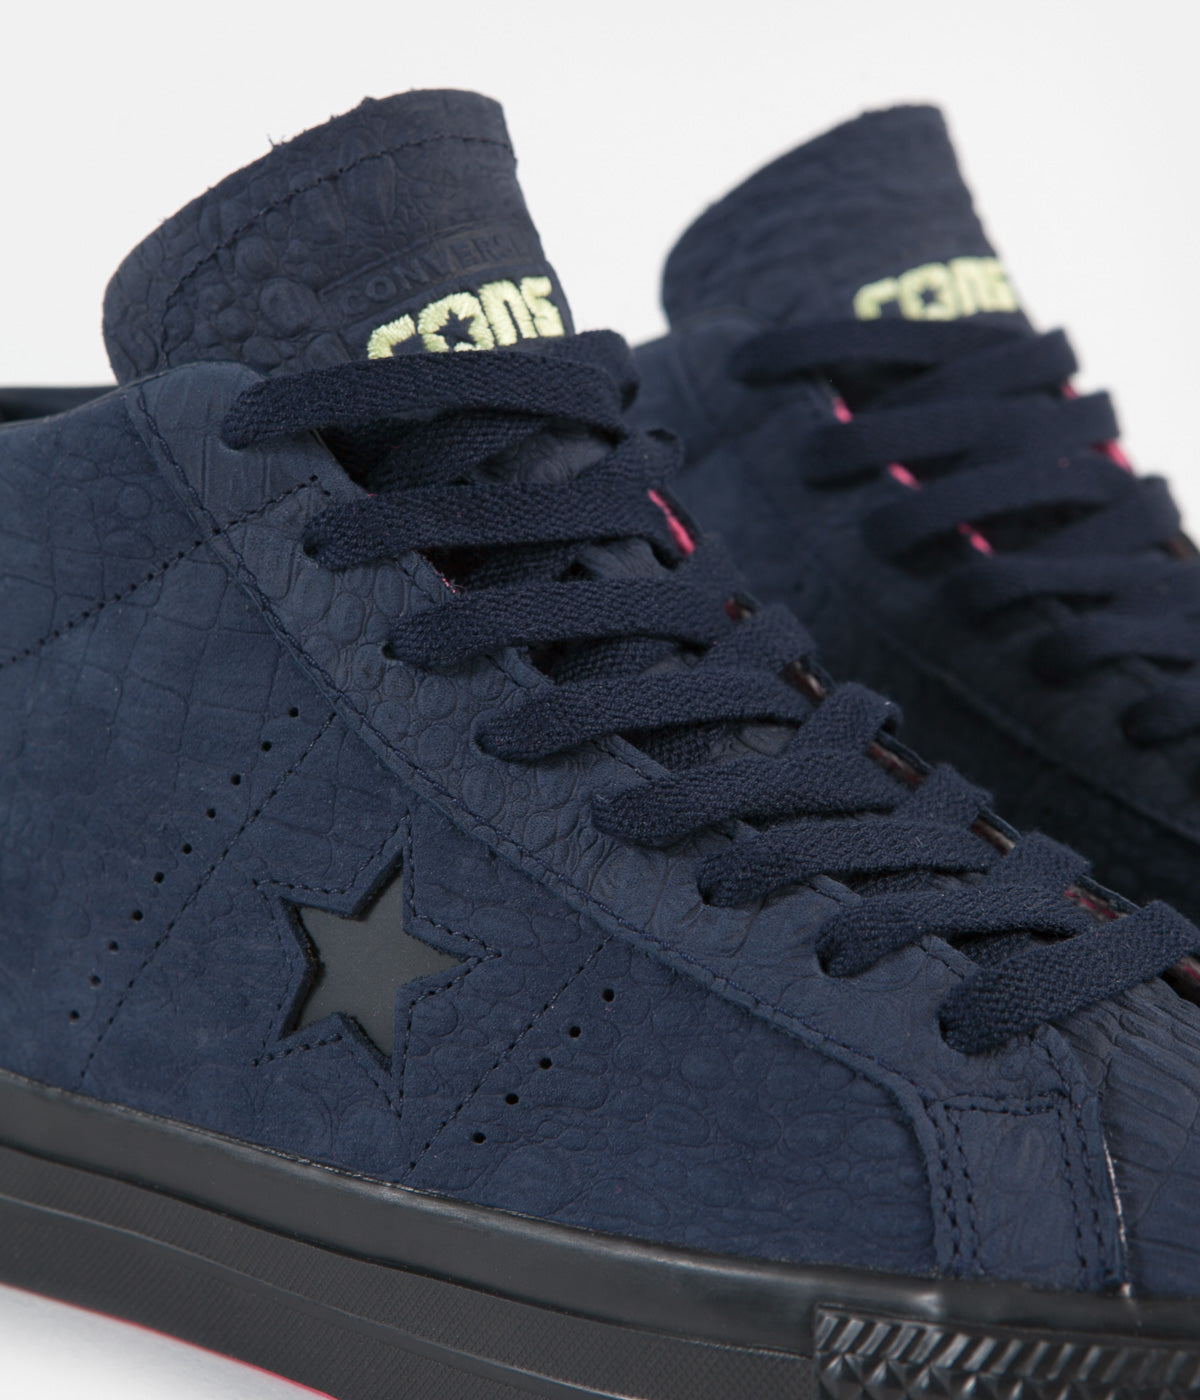 converse one star mid pro